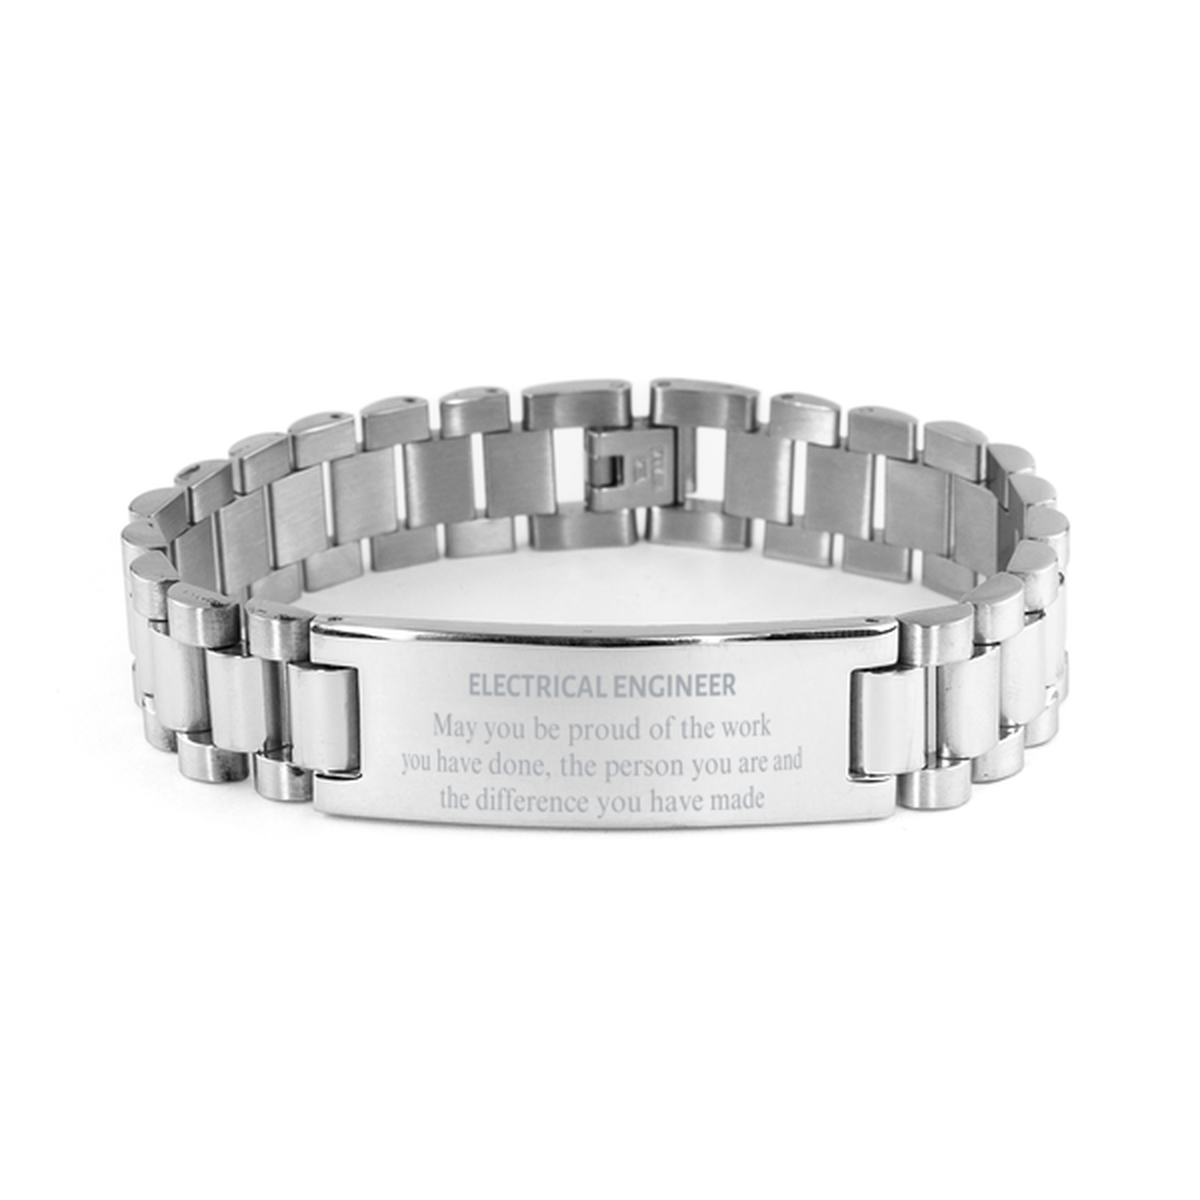 Electrical Engineer May you be proud of the work you have done, Retirement Electrical Engineer Ladder Stainless Steel Bracelet for Colleague Appreciation Gifts Amazing for Electrical Engineer